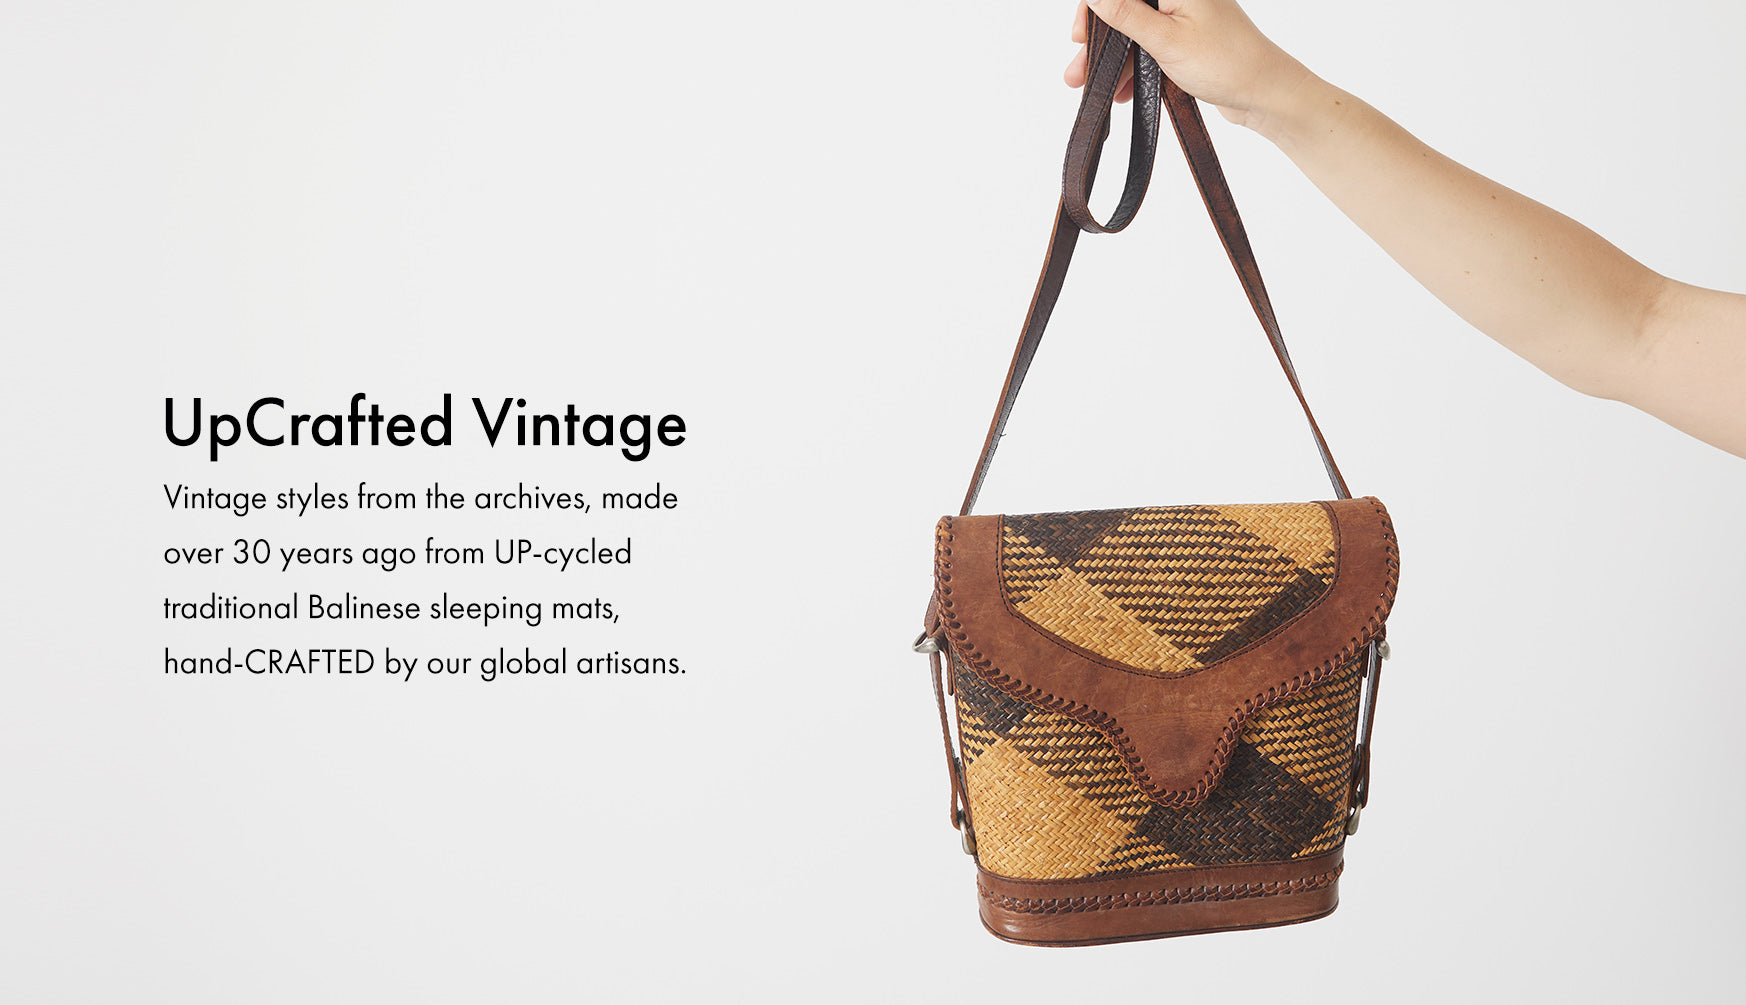 The Referral by New Vintage Handbags